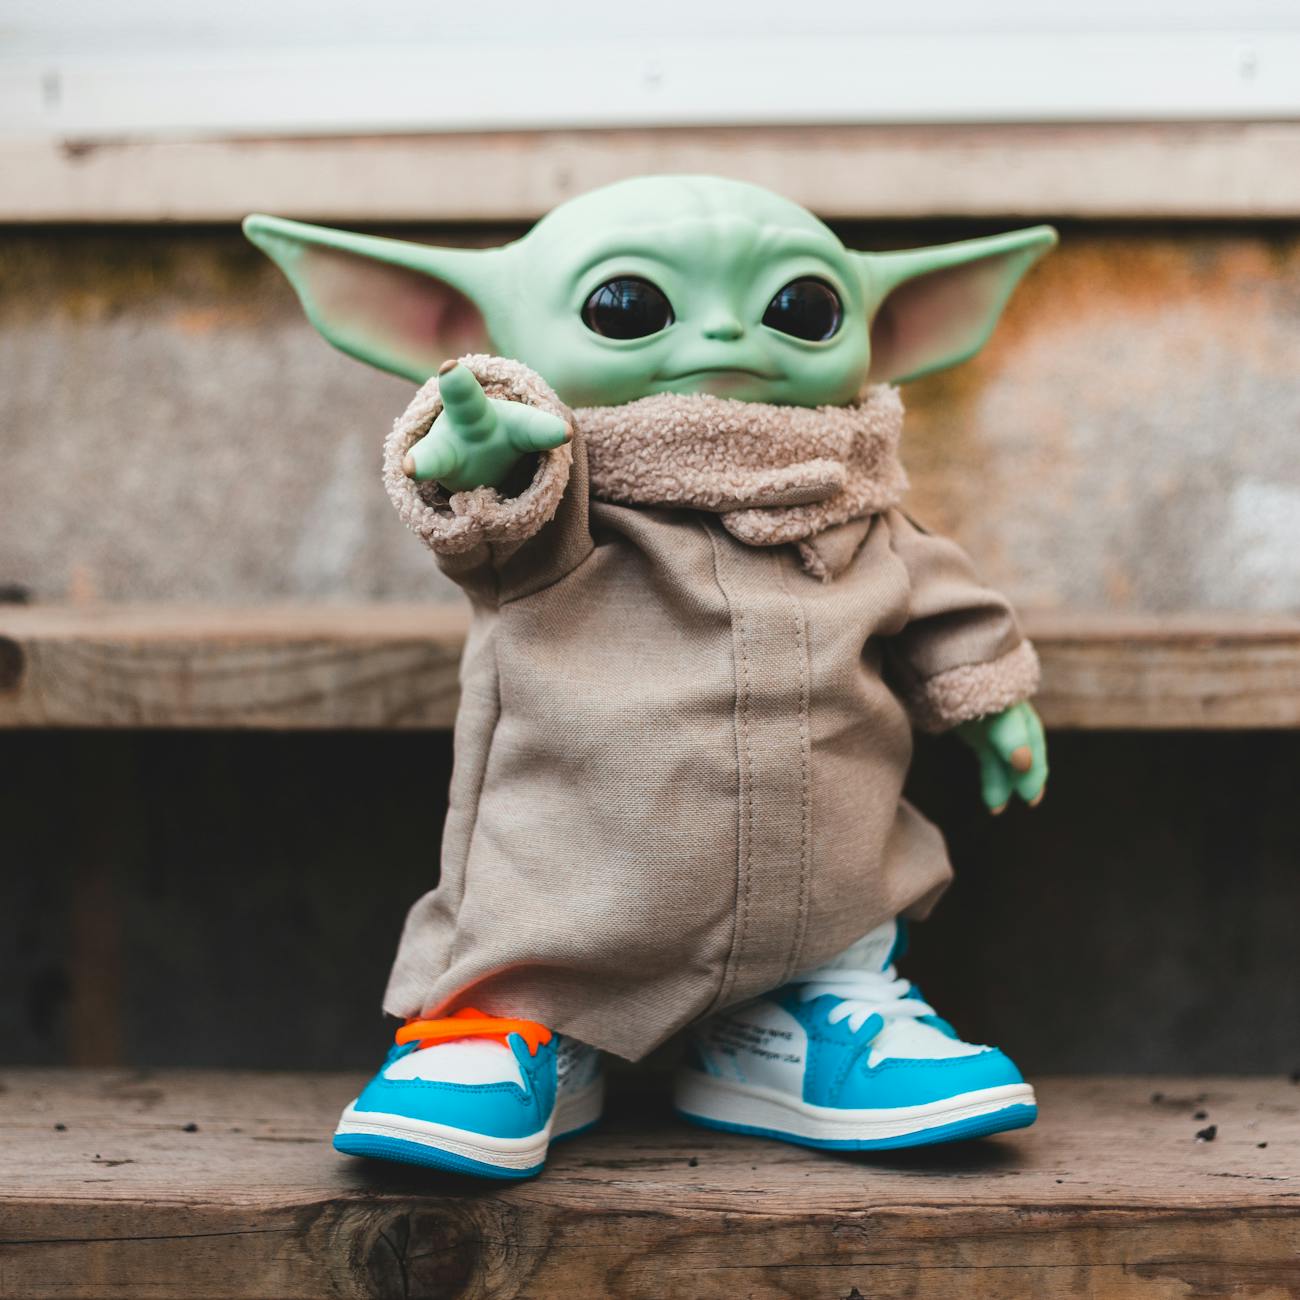 An image of Grogu, "Baby Yoda," pointing. He's wearing a brown robe and blue sneakers.